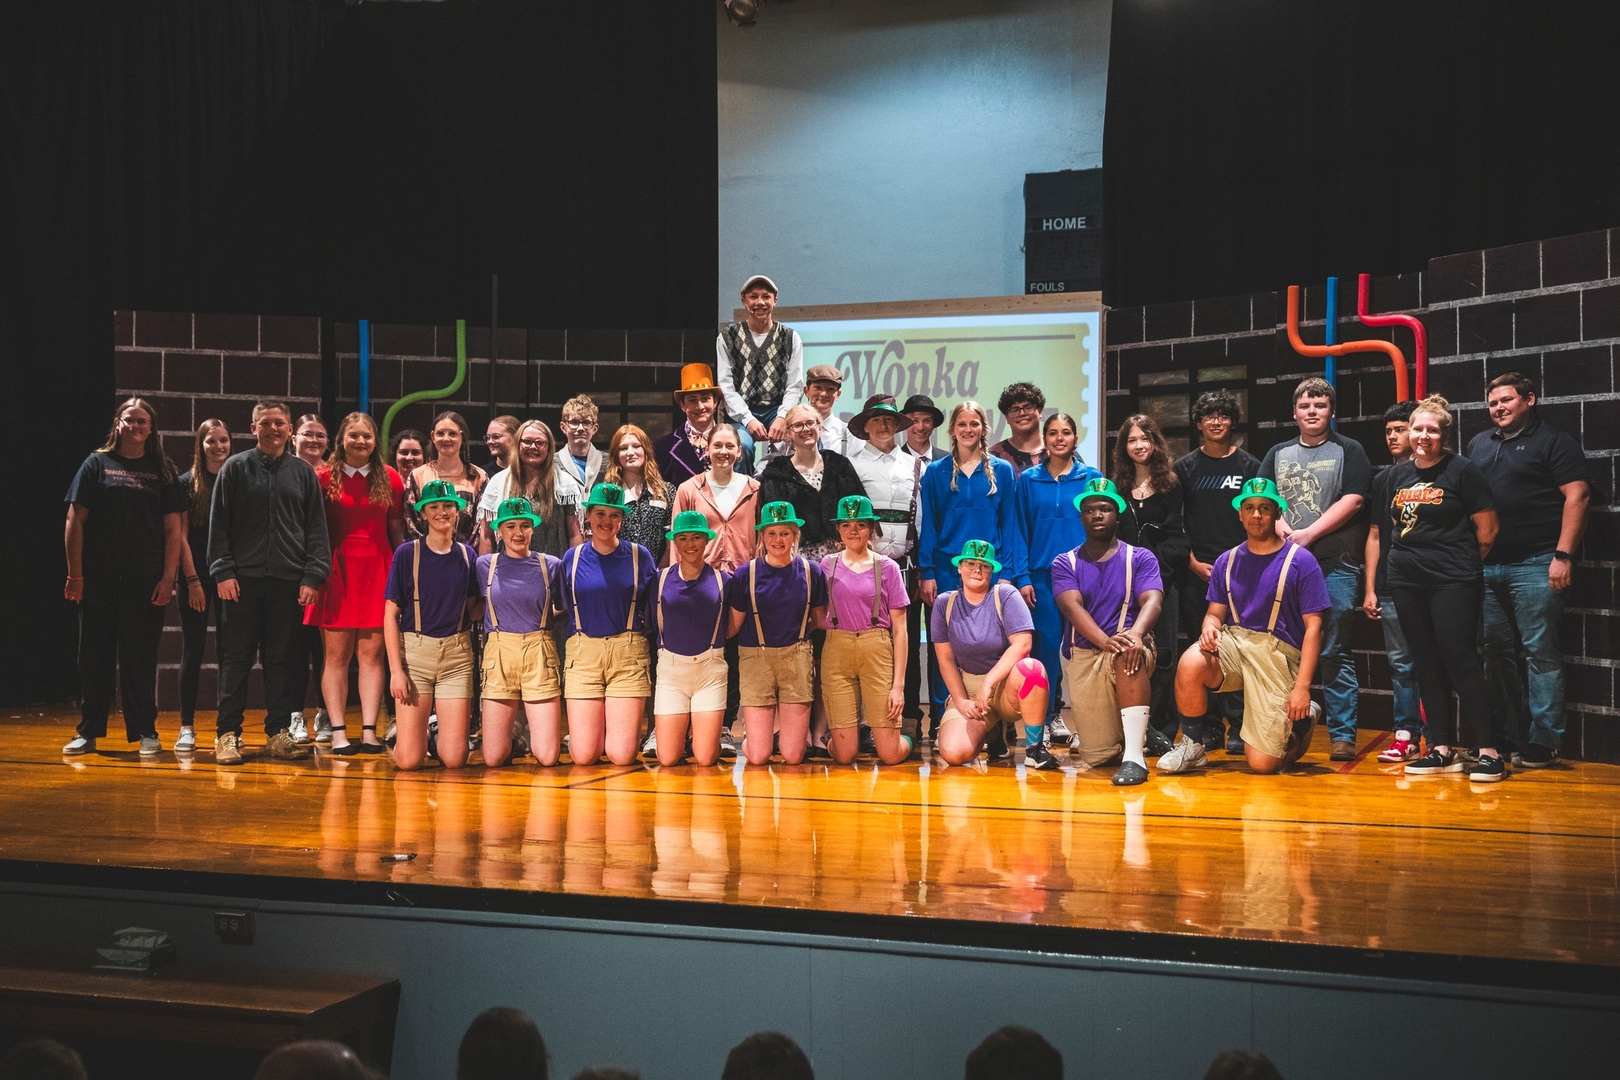 Cast and Crew Photo of the Willy Wonka and the Chocolate Factory Production